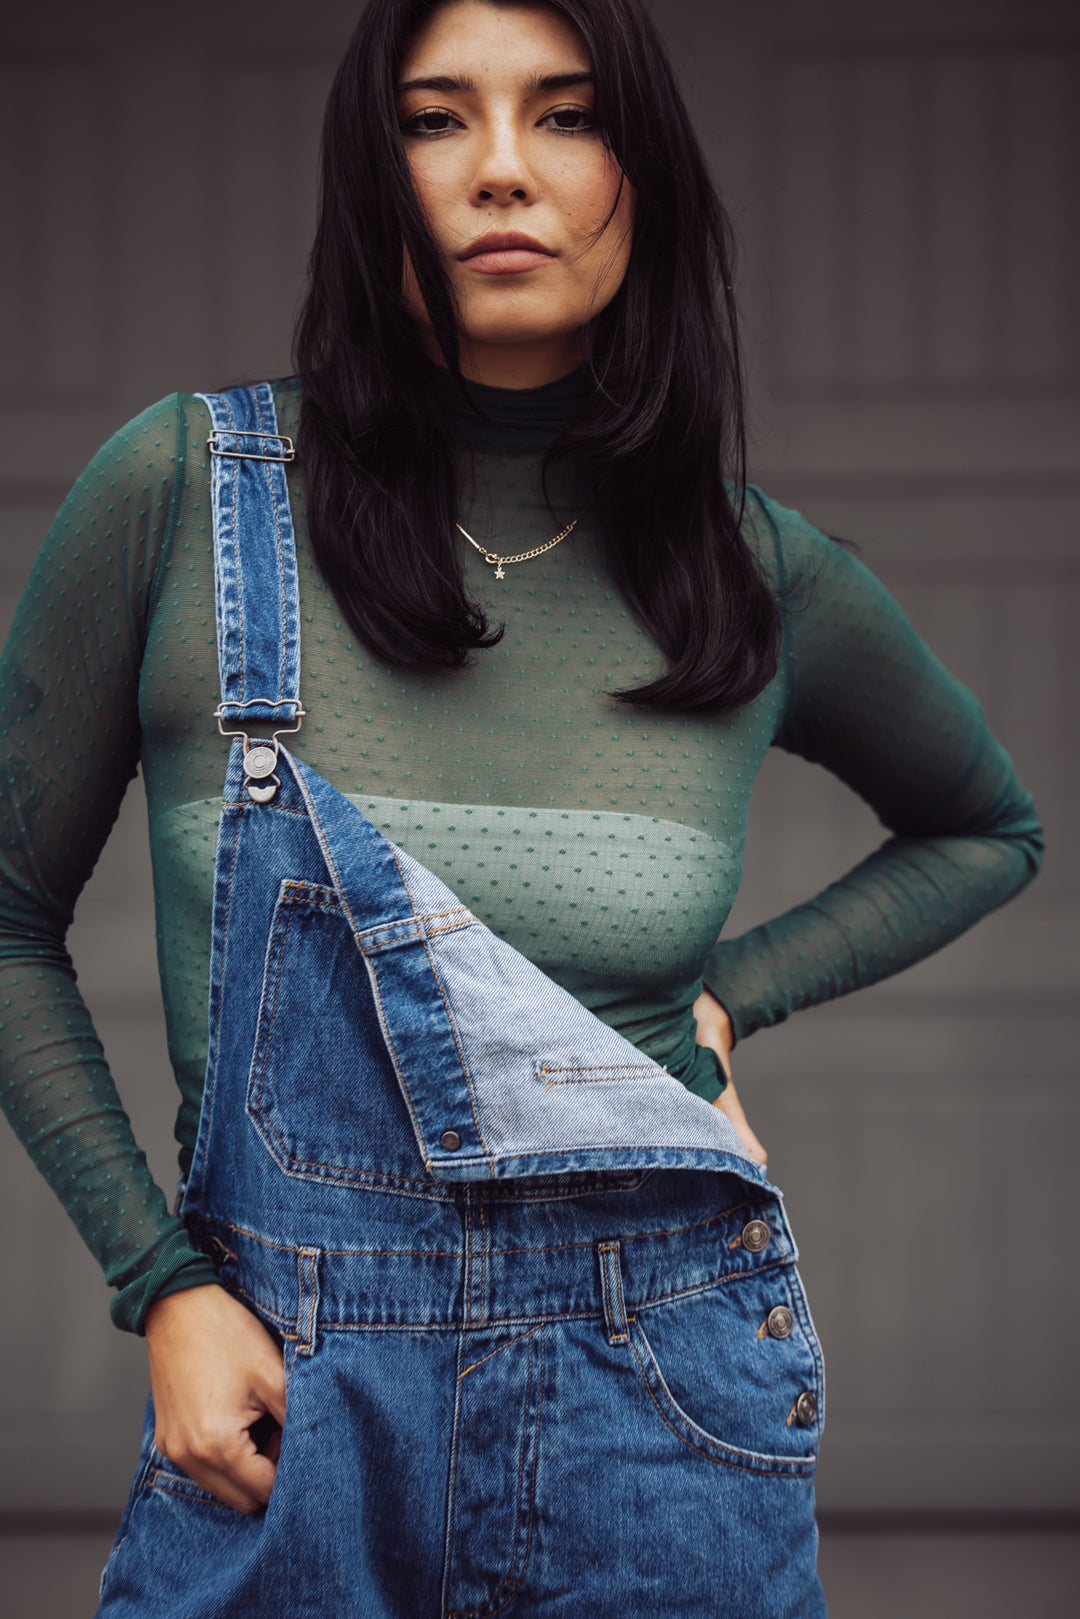 FREE PEOPLE ON THE DOT LAYERING LONG SLEEVE TOP - EVERGREEN